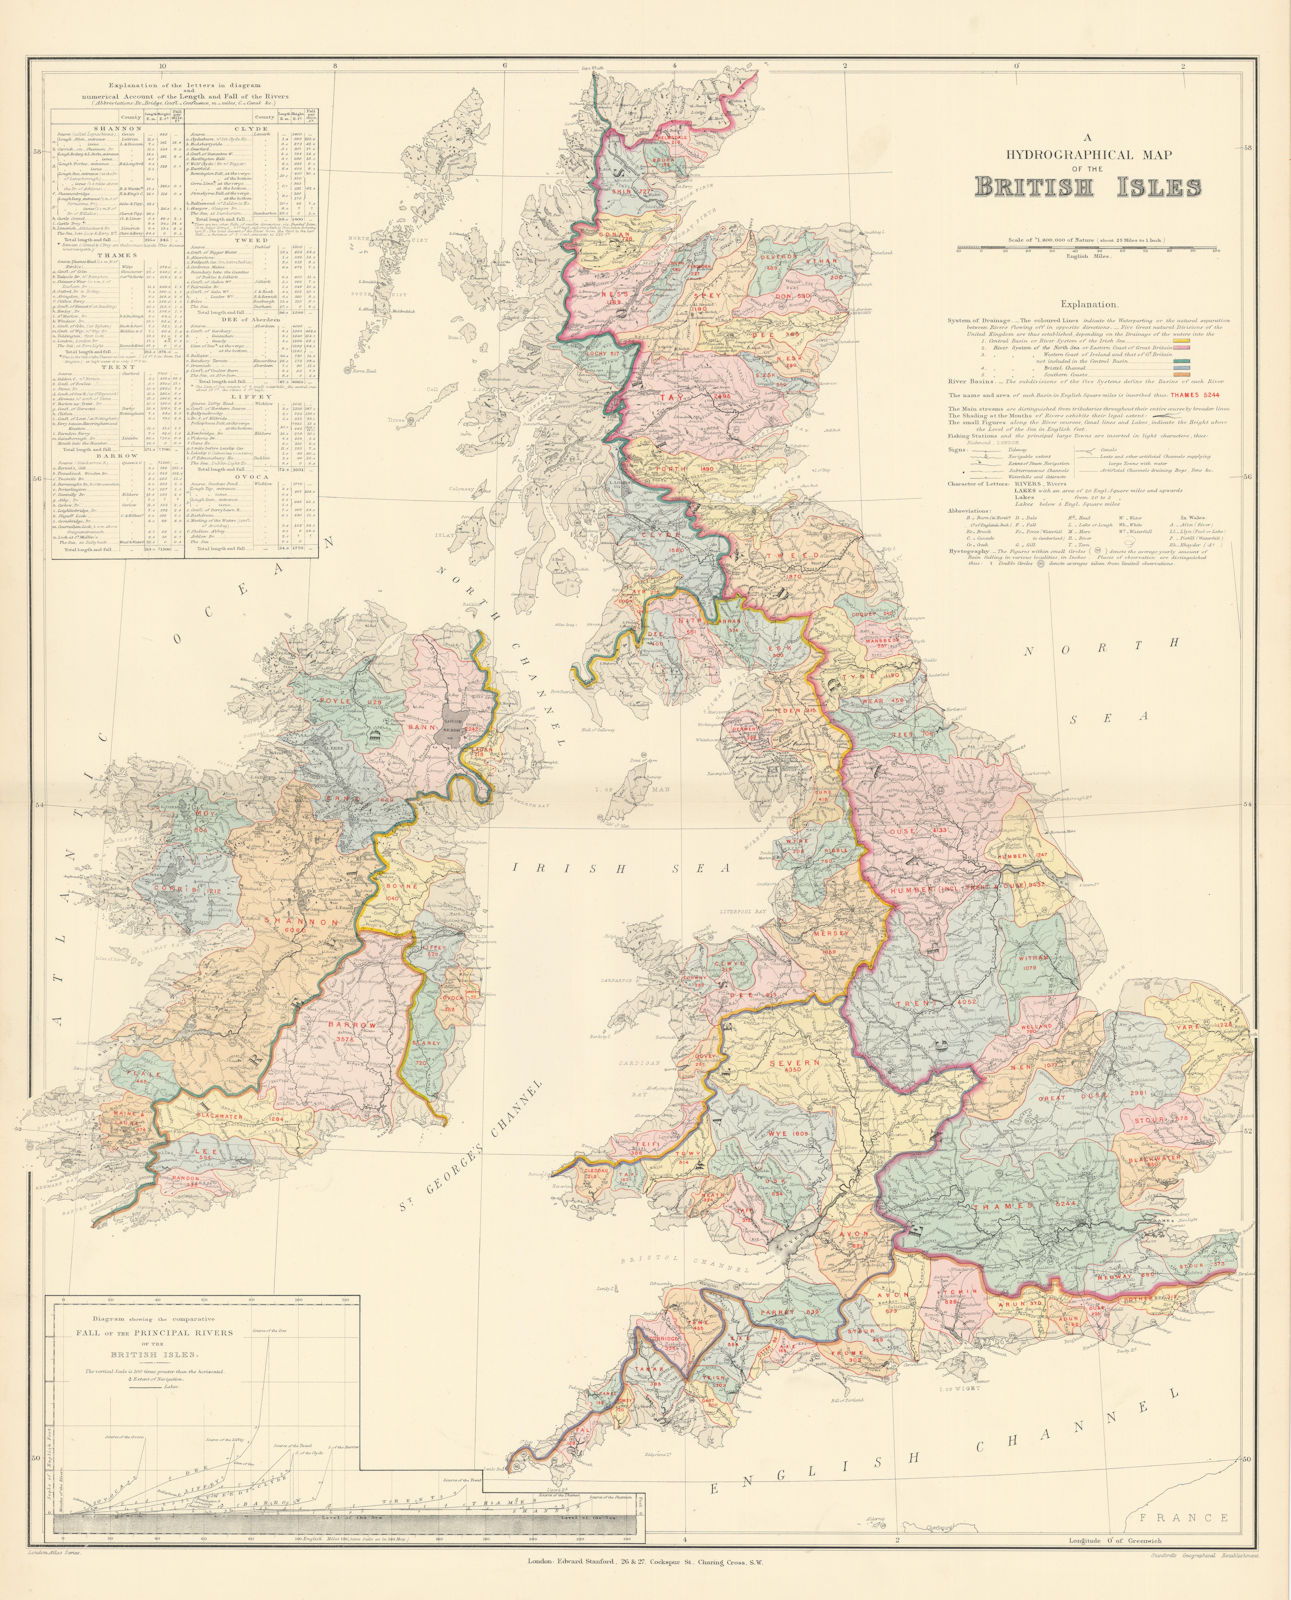 Associate Product British Isles hydrographical. Watersheds River drainage basins STANFORD 1896 map